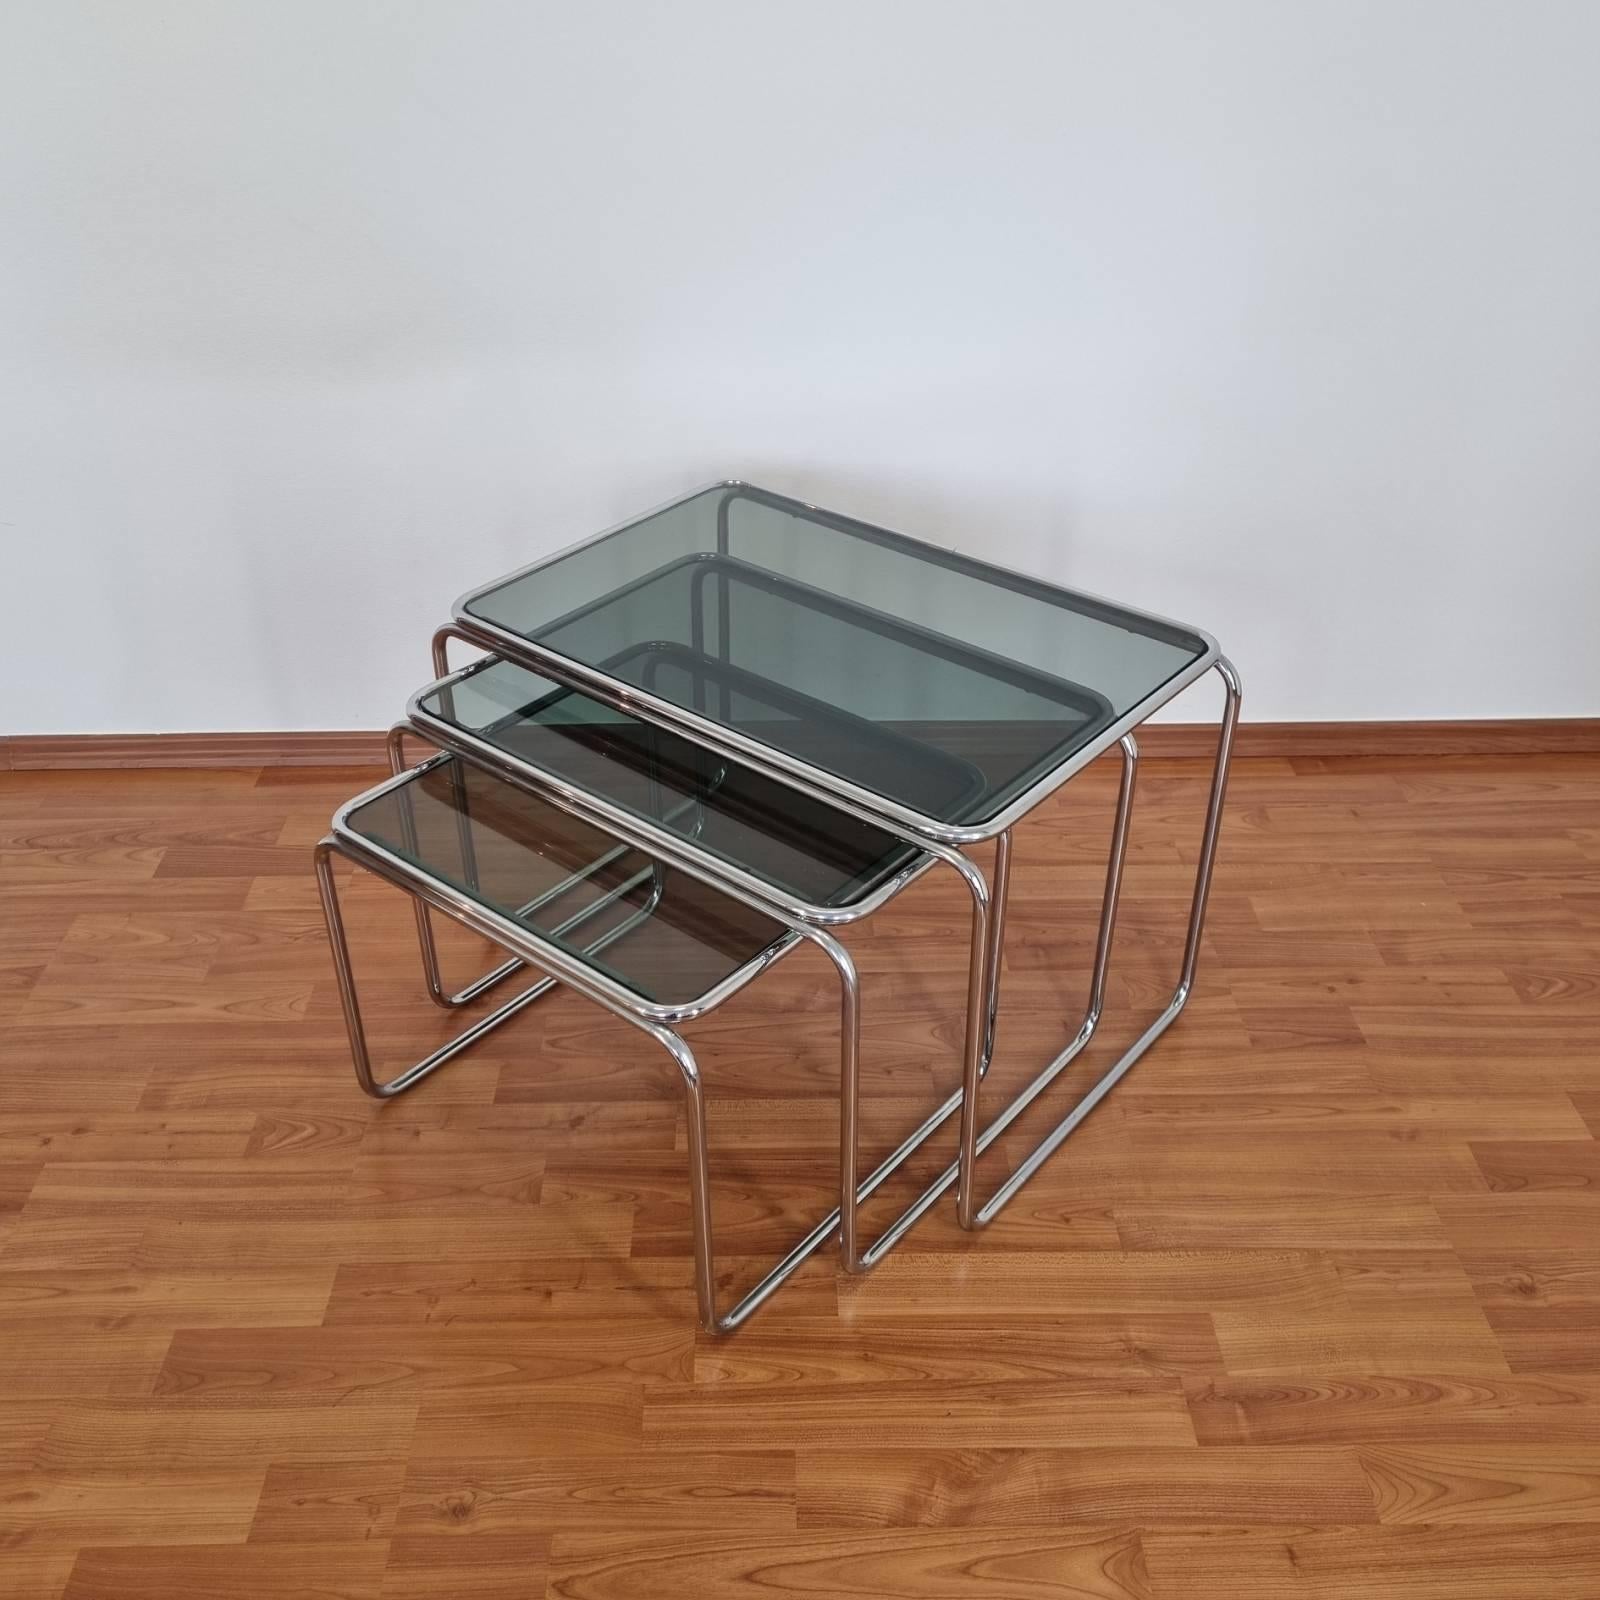 Set of 3 coffee tables from the 70s era. Made in Bauhaus style in Italy.
Made of metal chromed legs and glass. In verry good vintage
condition with minor signs of use.
